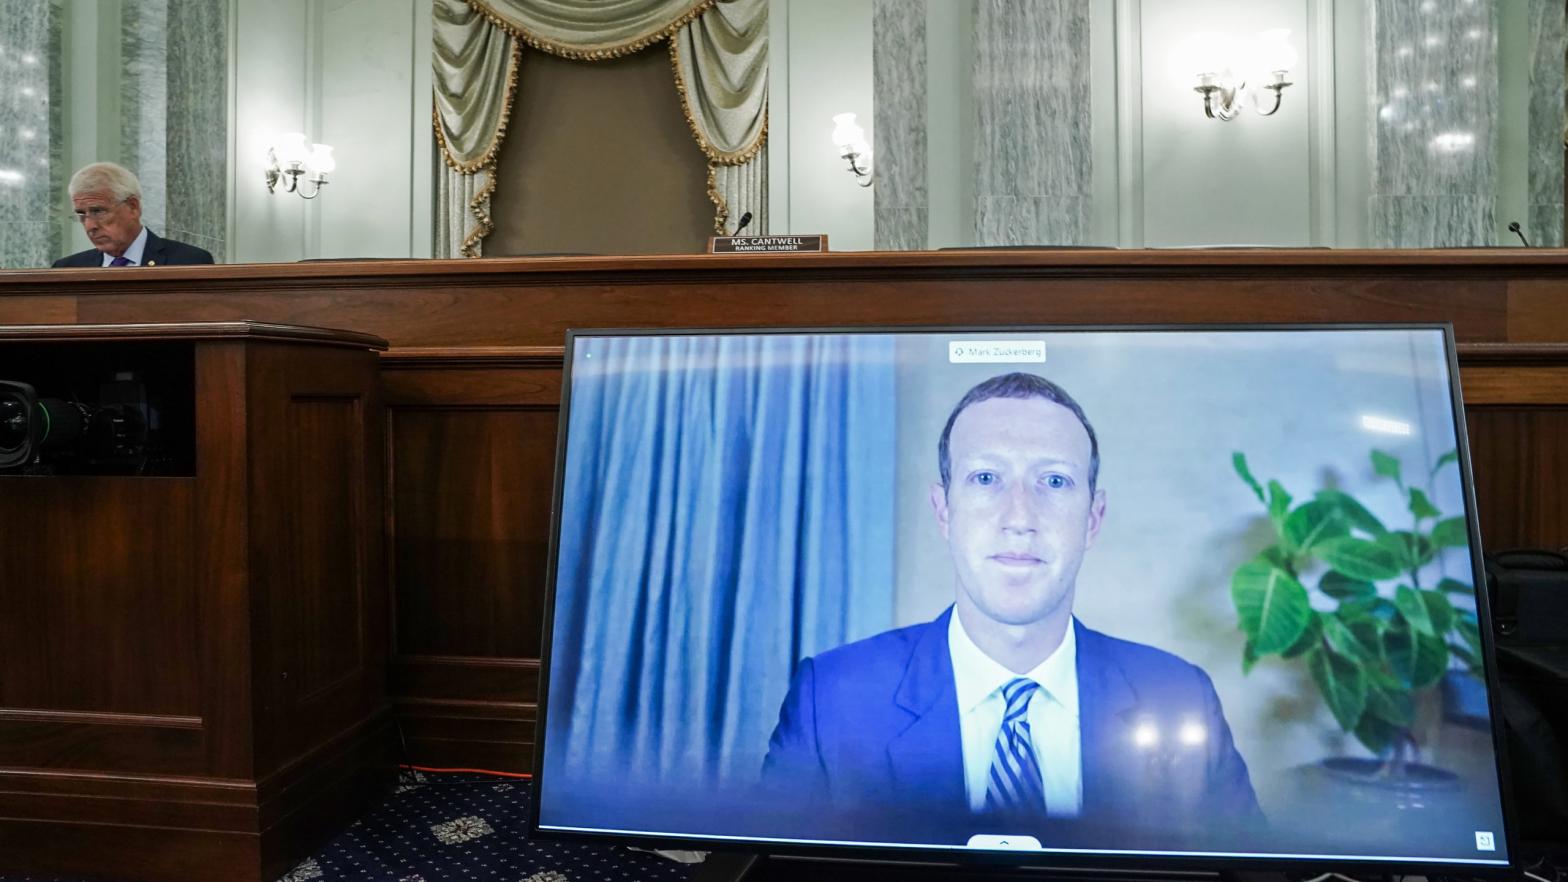 CEO of Facebook Mark Zuckerberg appears on a monitor as he testifies remotely during a hearing to discuss reforming Section 230 of the Communications Decency Act with big tech companies on October 28, 2020 in Washington, DC. (Photo: Michael Reynolds, Getty Images)